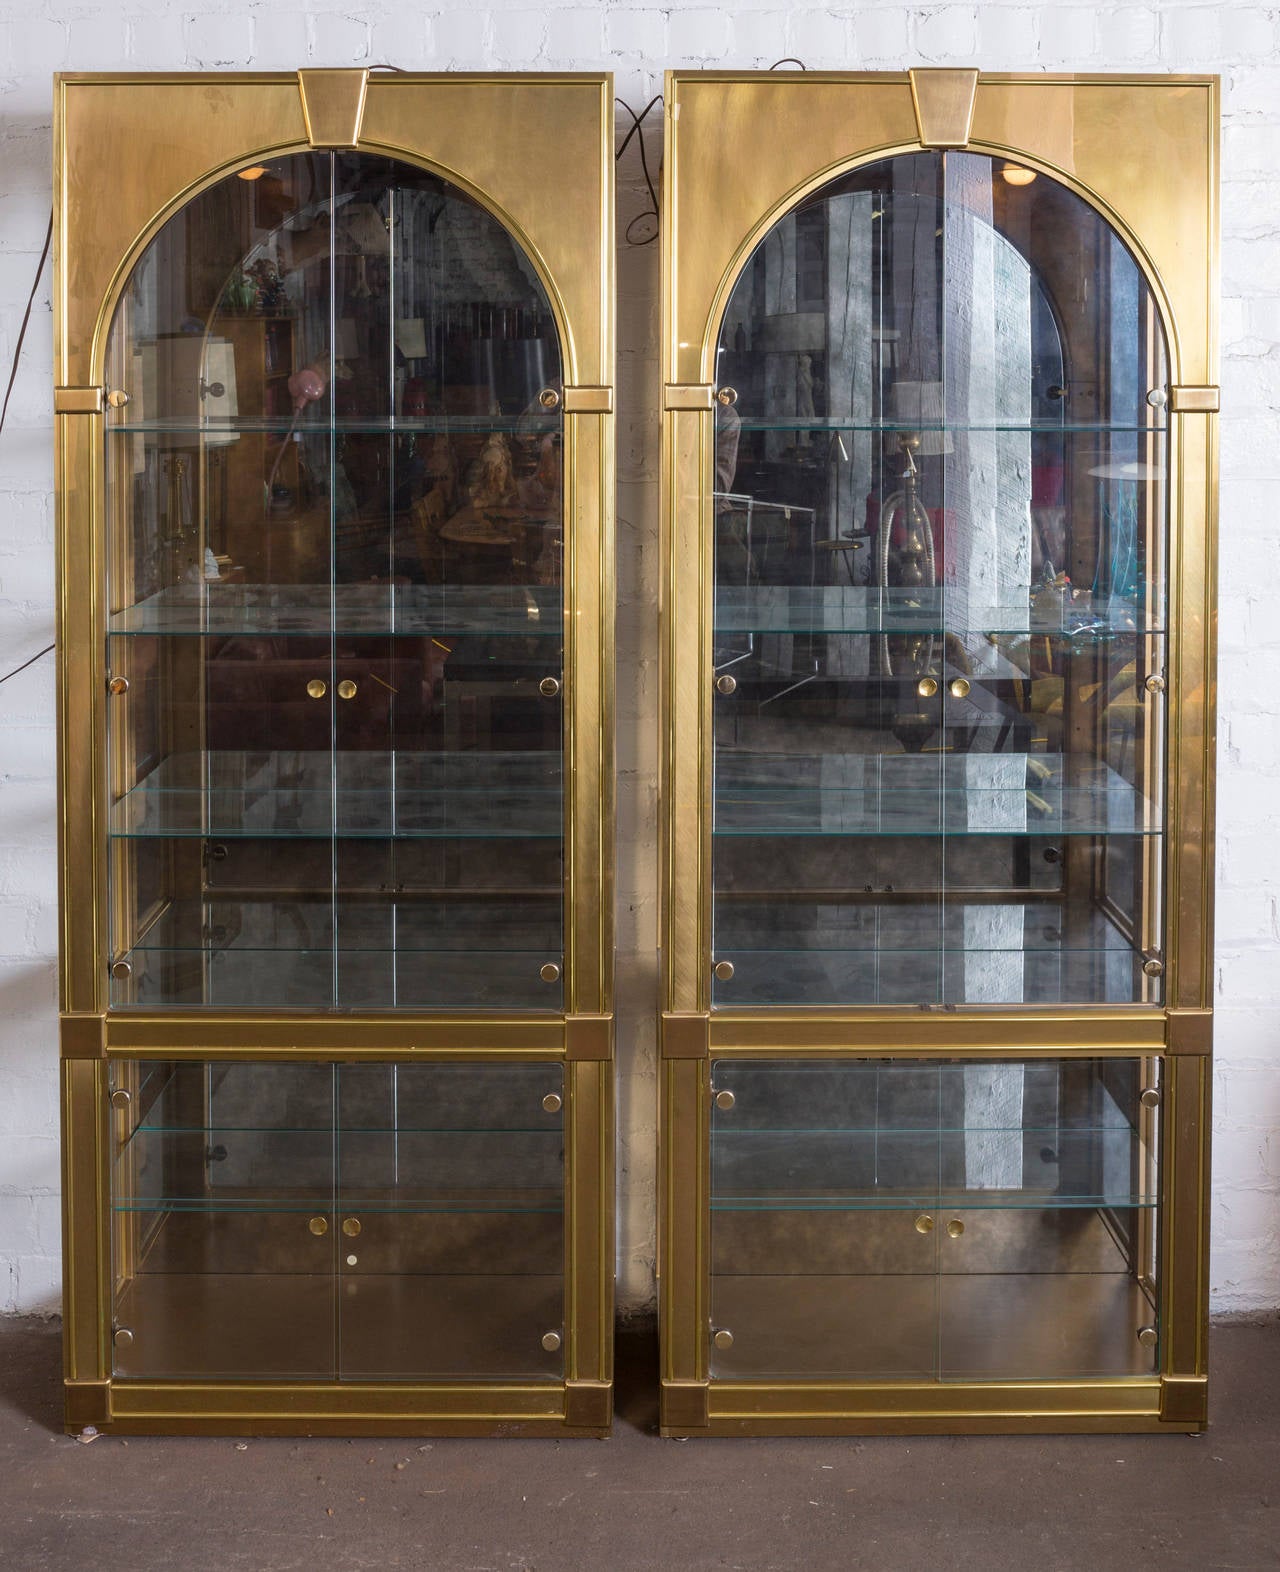 Gorgeous pair of solid brass display case vitrines by Mastercraft, circa 1970. This pair is in gorgeous vintage condition with normal wear. Brass has a beautiful patina. Each vitrine has six shelves.

Measures: 84.25